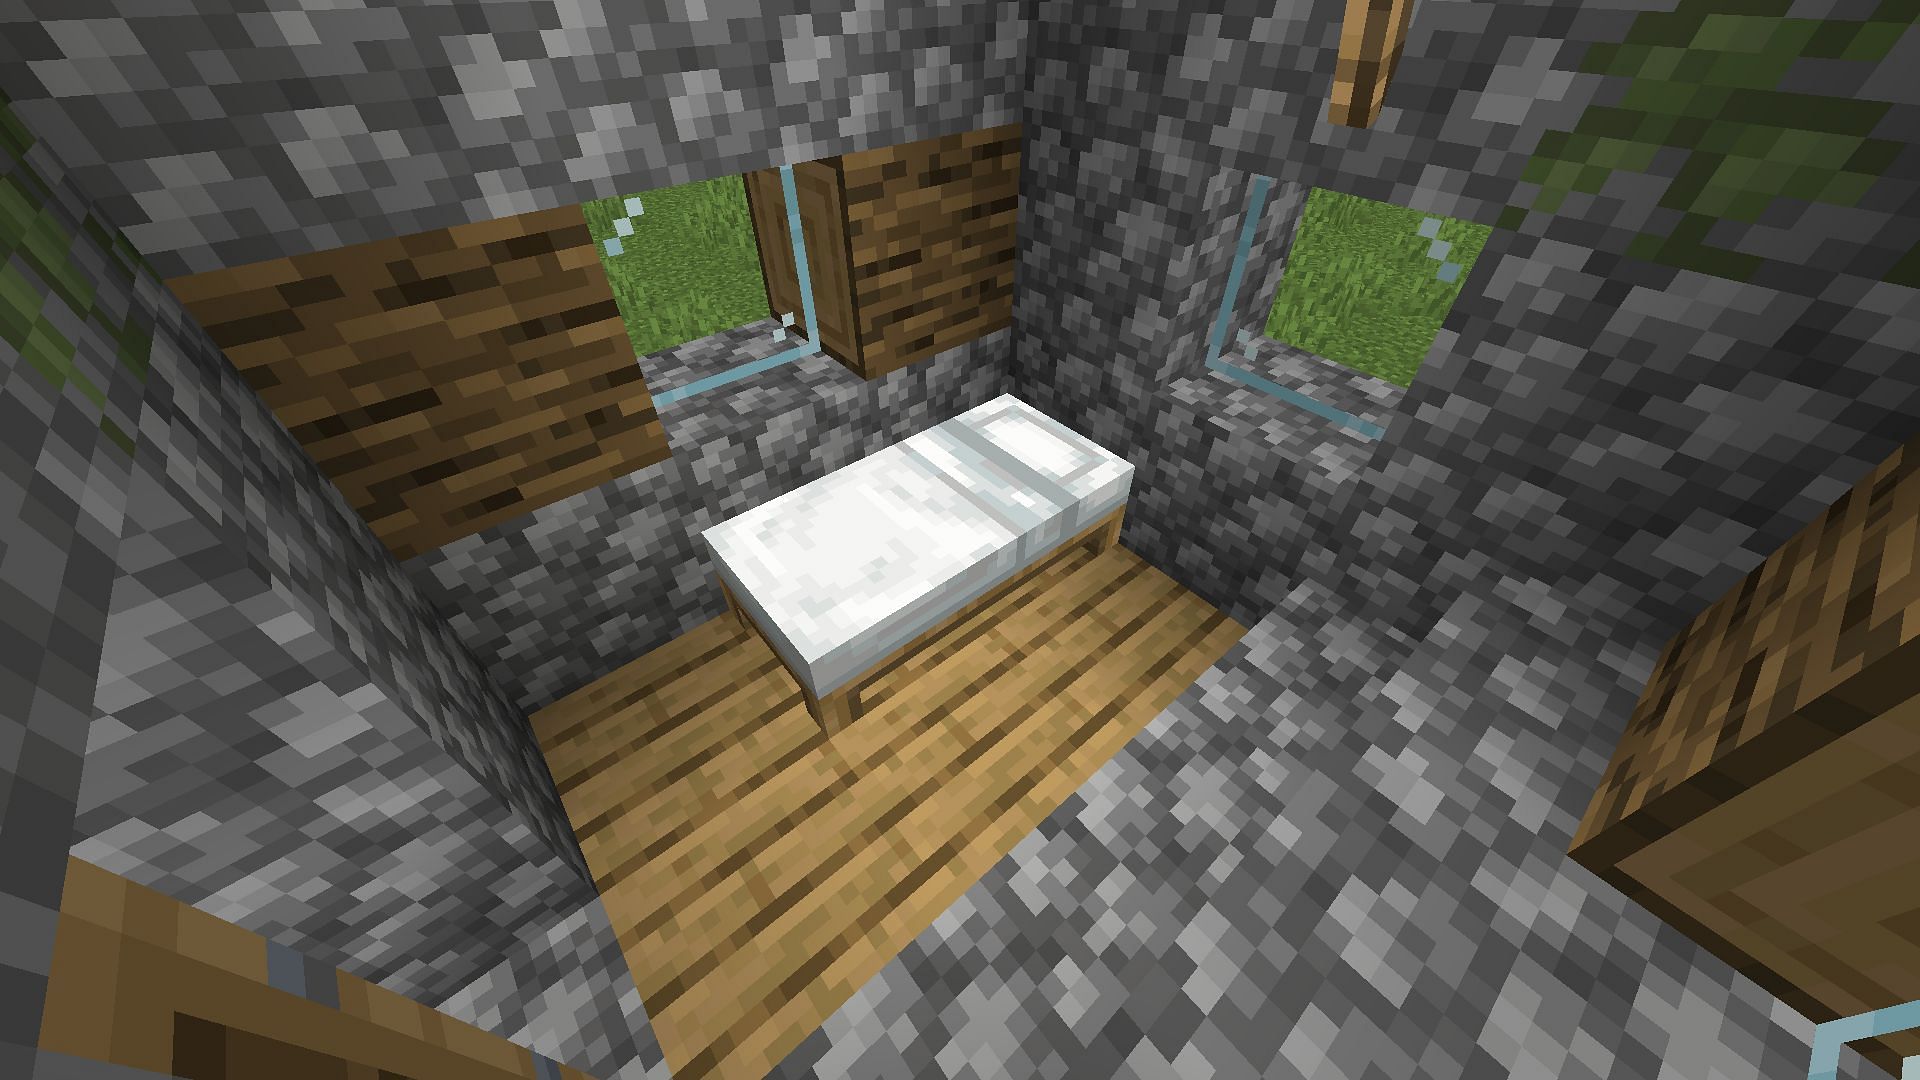 Beds might also cause breeding problems for villagers in Minecraft (Image via Mojang)